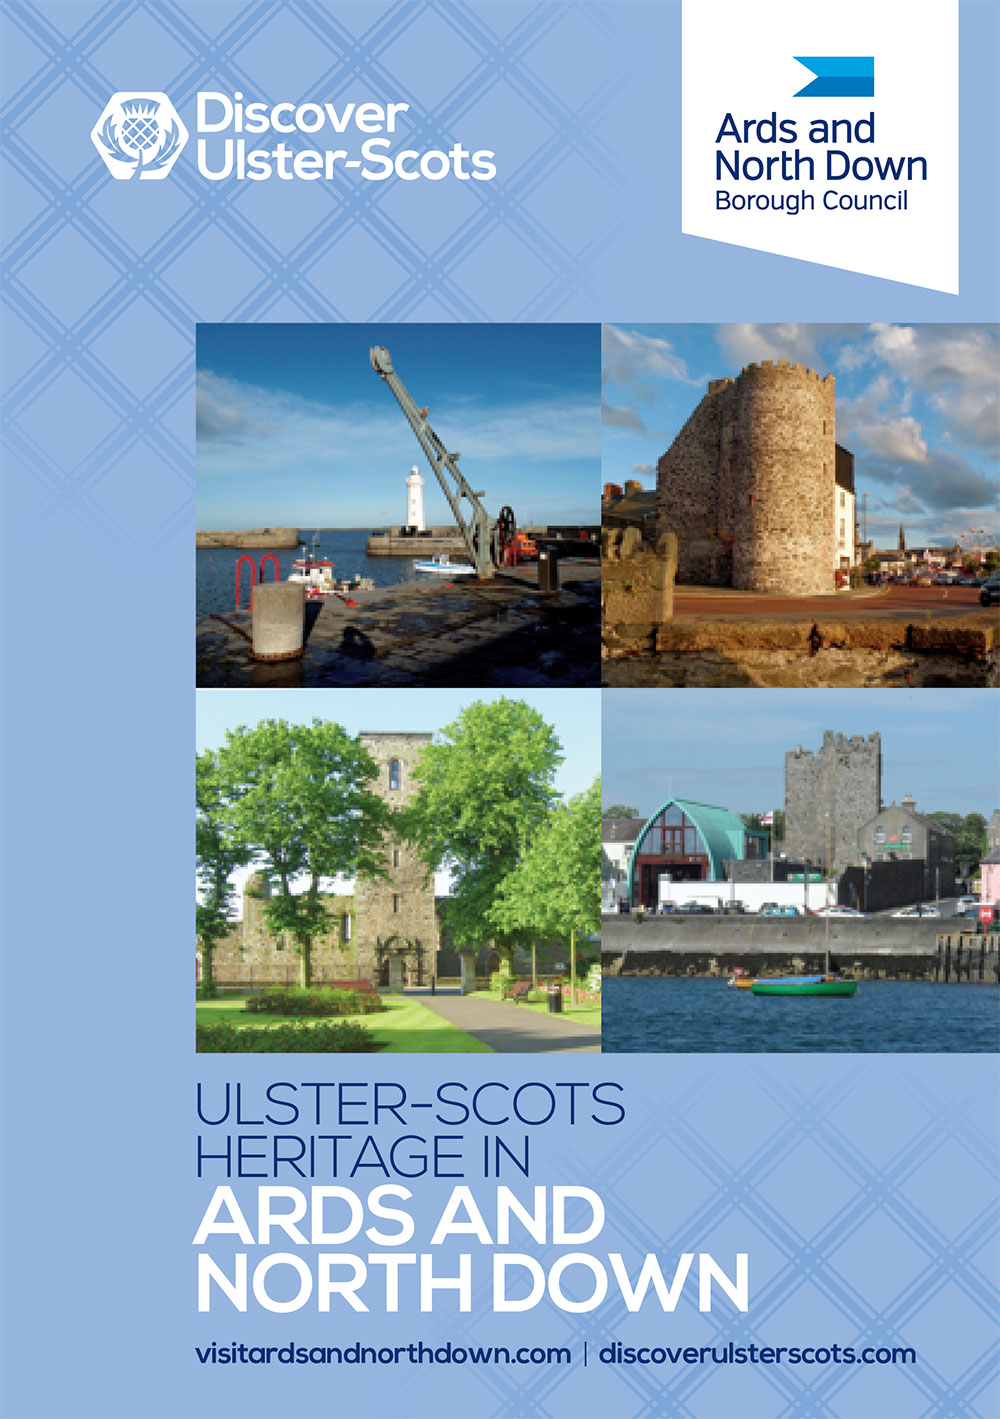 Ulster-Scots Heritage in Ards and North Down